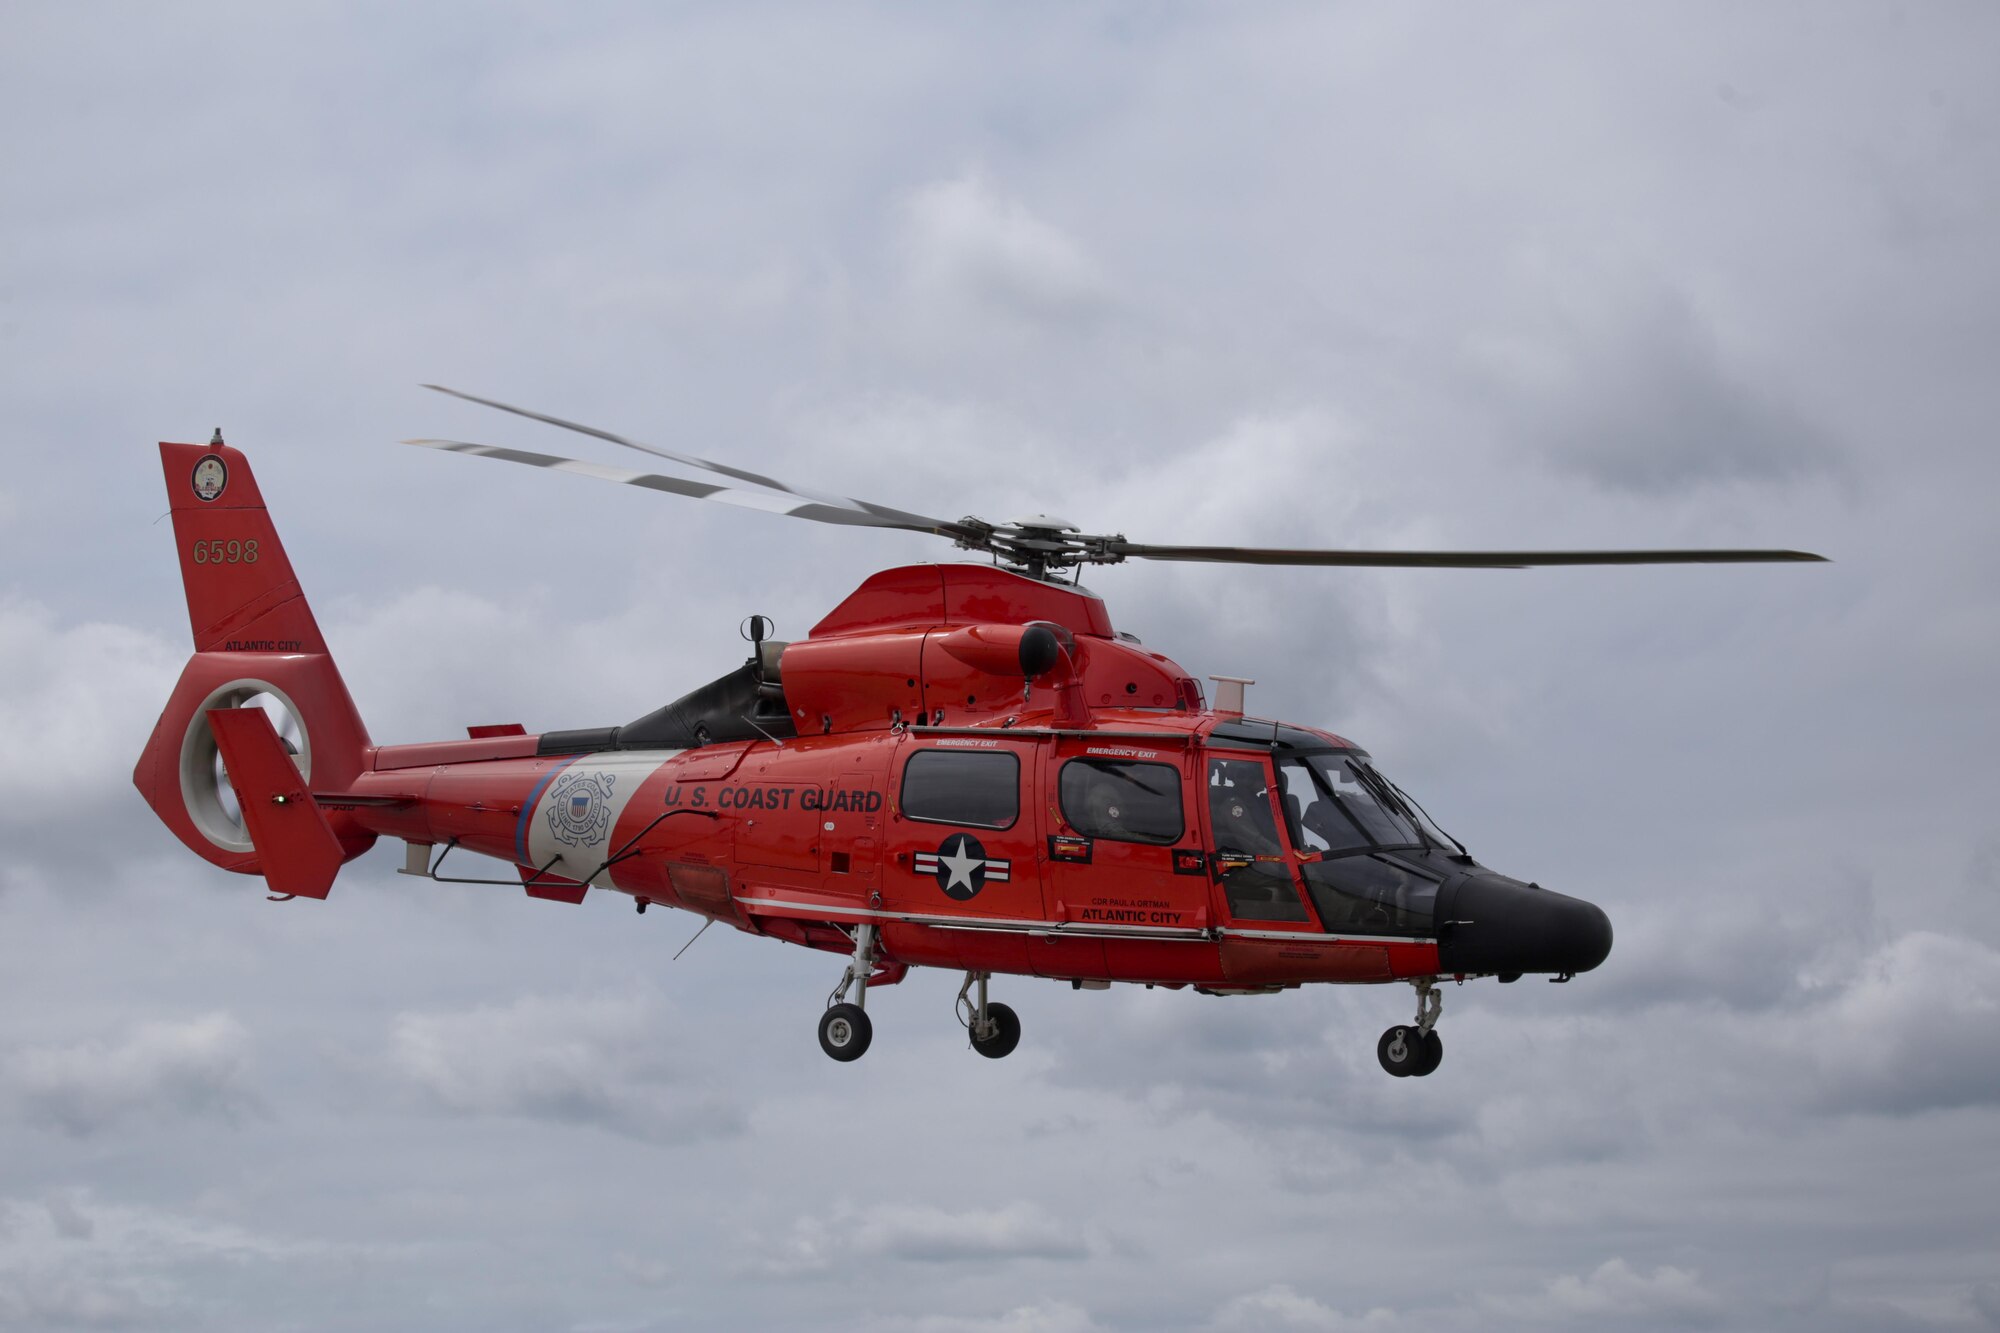 A U.S. Coast Guard HH-65C Dolphin helicopter from Coast Guard Air Station Atlantic City takes off during a three-day Aeropsace Control Alert CrossTell live-fly training exercise at Atlantic City International Airport, N.J., May 24, 2017. Representatives from the Air National Guard fighter wings, Civil Air Patrol, and U.S. Coast Guard rotary-wing air intercept units will conduct daily sorties from May 23-25 to hone their skills with tactical-level air-intercept procedures. (U.S. Air National Guard photo by Master Sgt. Matt Hecht/Released)